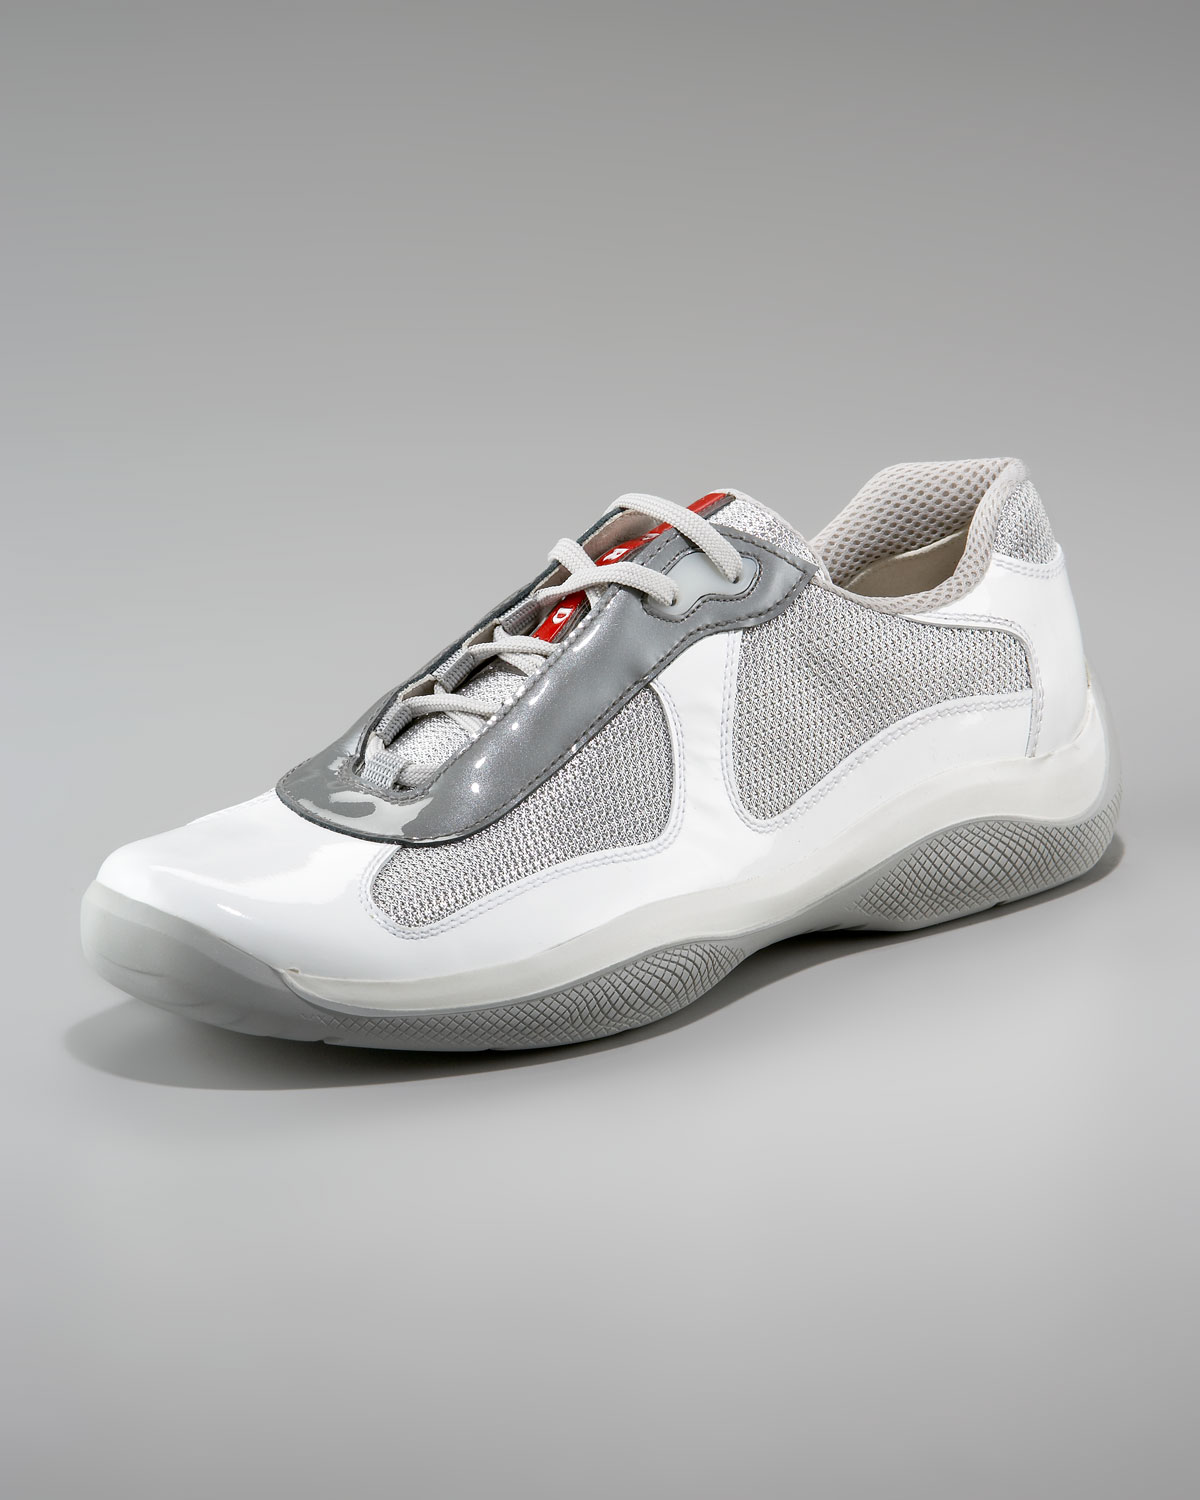 White Prada Americas Cup Sneakers Online Store, UP TO 63% OFF |  www.apmusicales.com